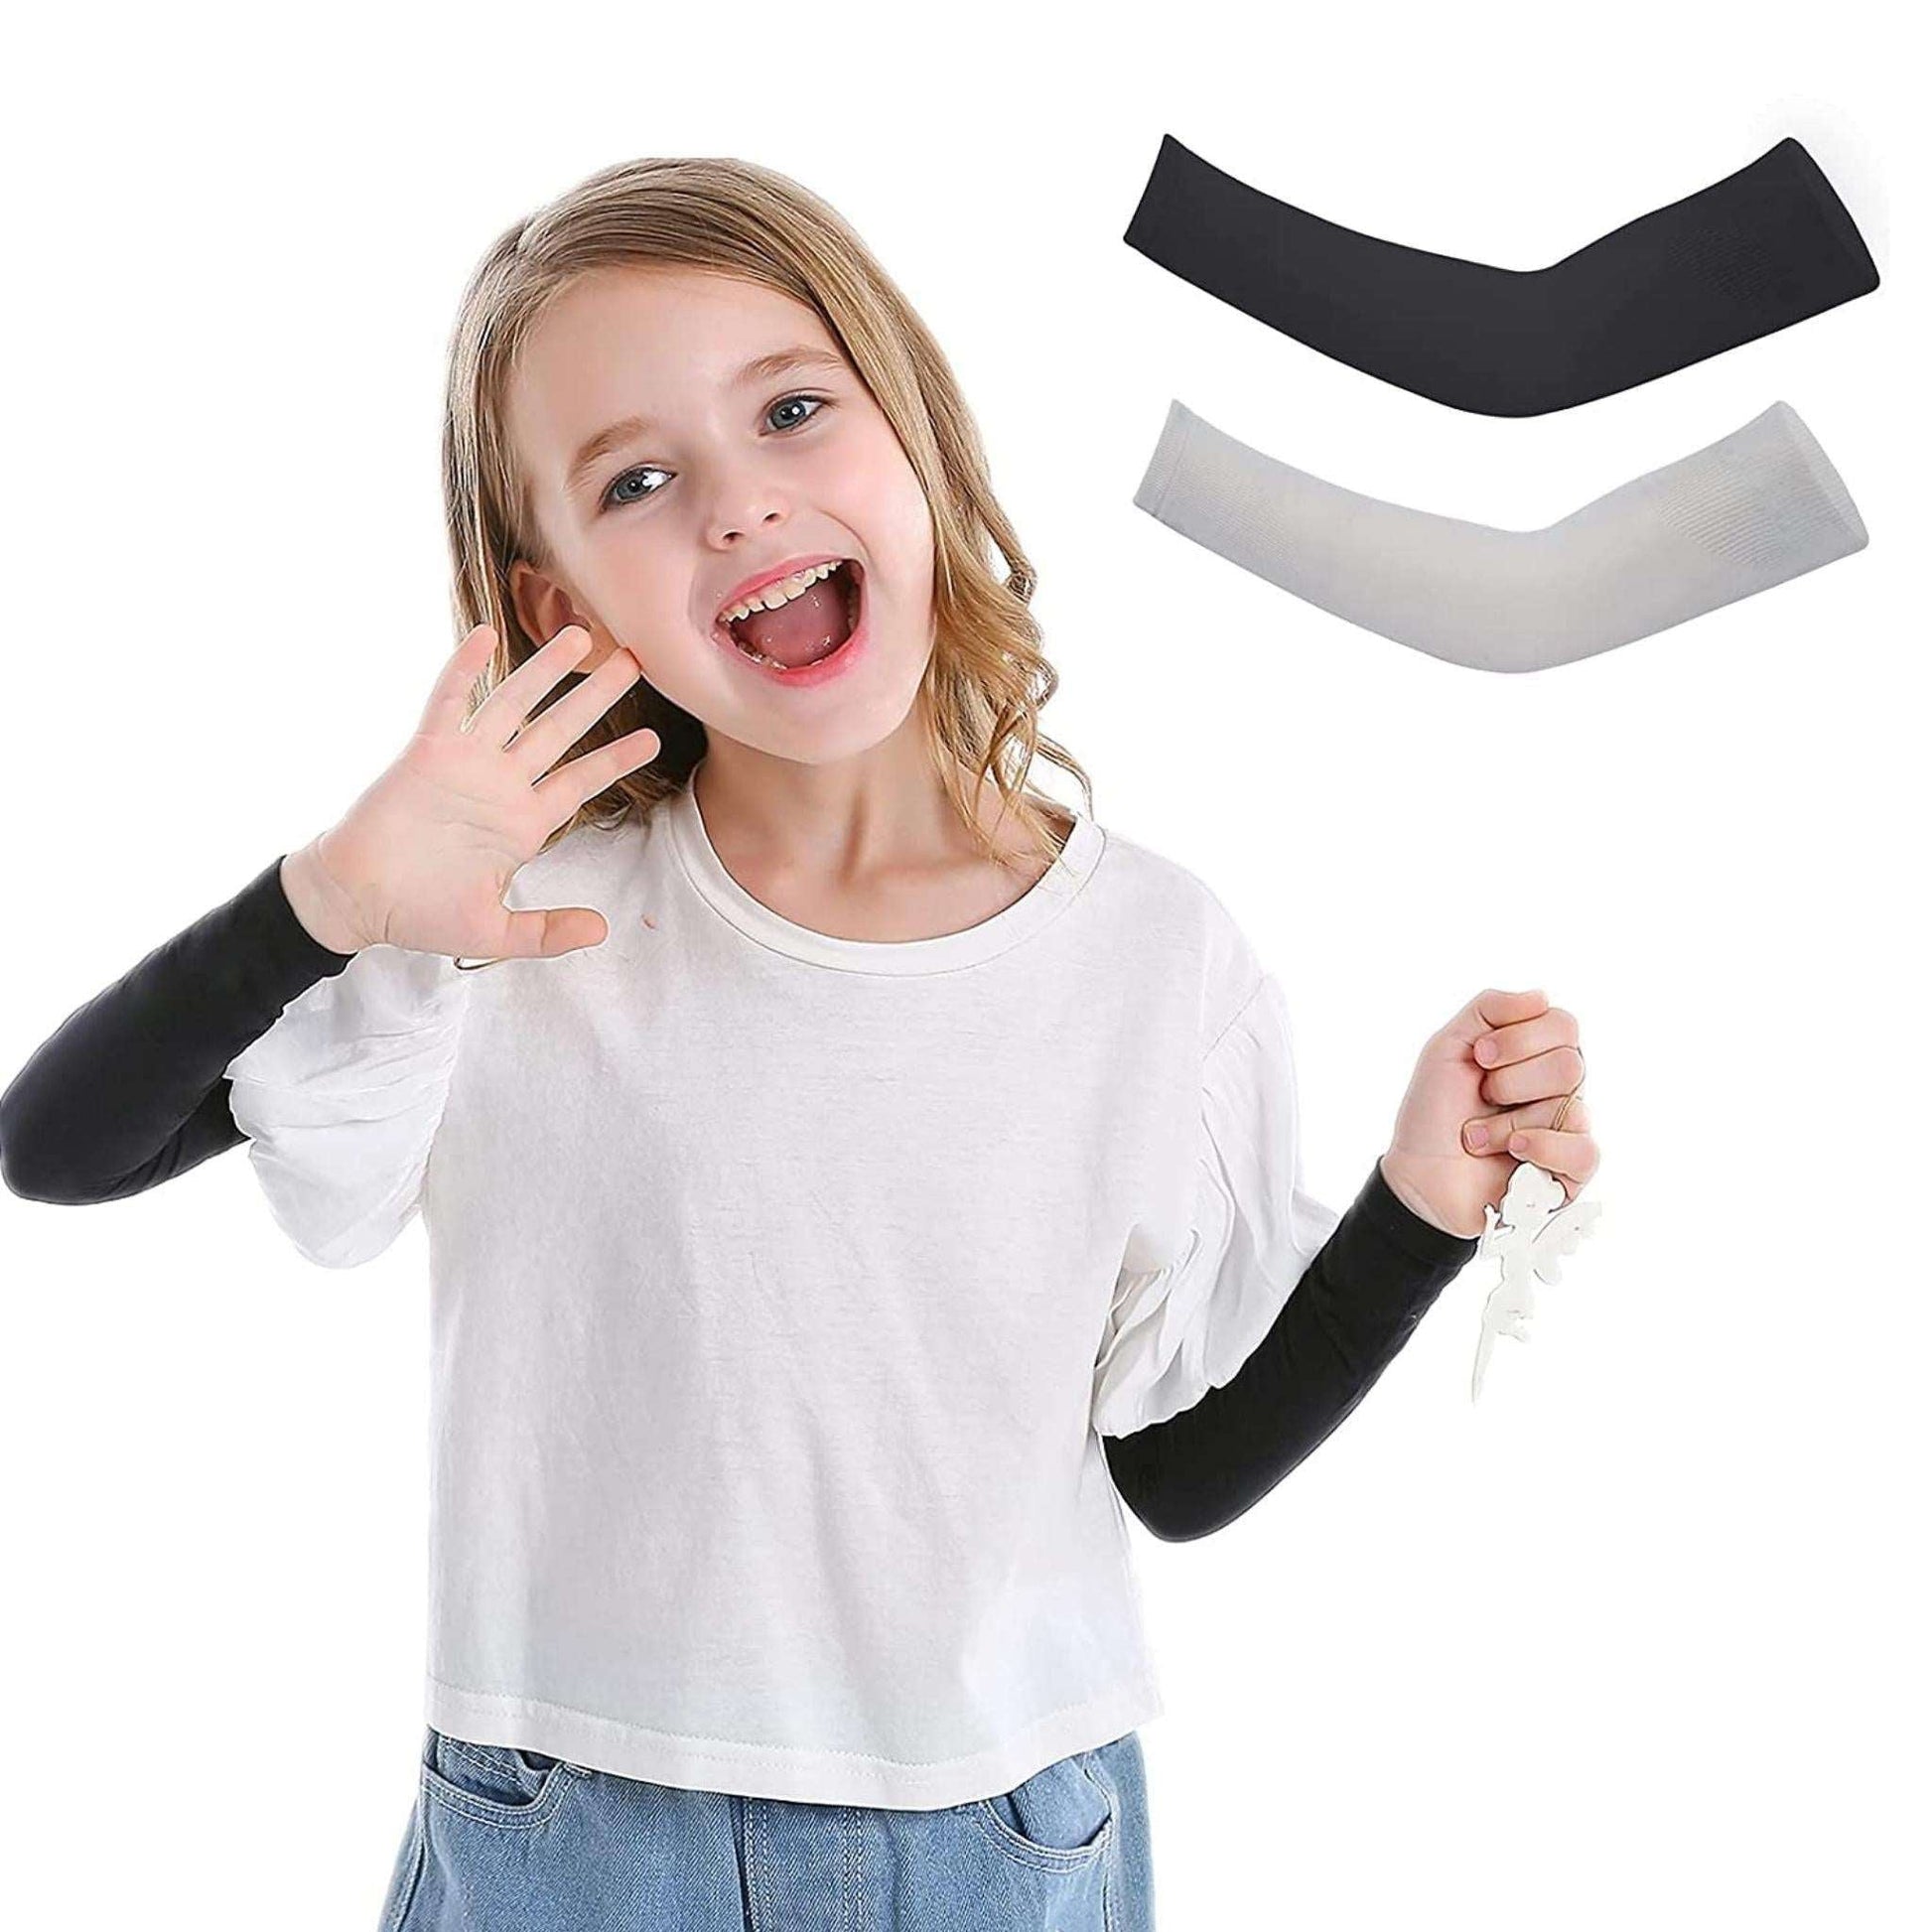 YOUTH ROBE's Kid's Cotton Arm Sleeves (Let's Slim) - YOUTH ROBE